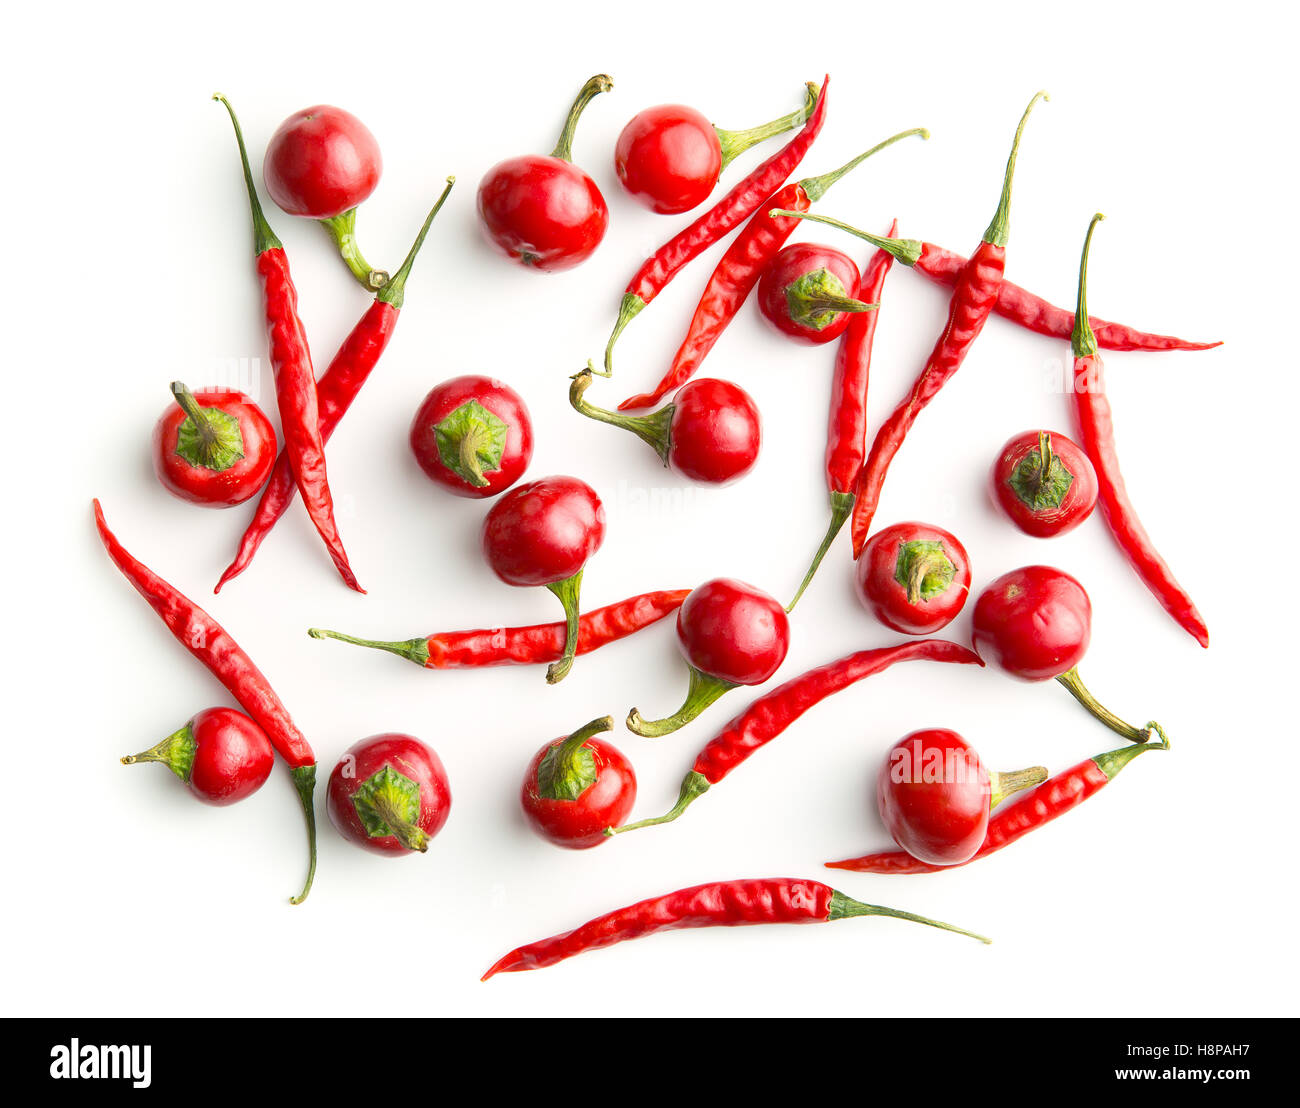 https://c8.alamy.com/comp/H8PAH7/red-chili-peppers-isolated-on-white-background-H8PAH7.jpg